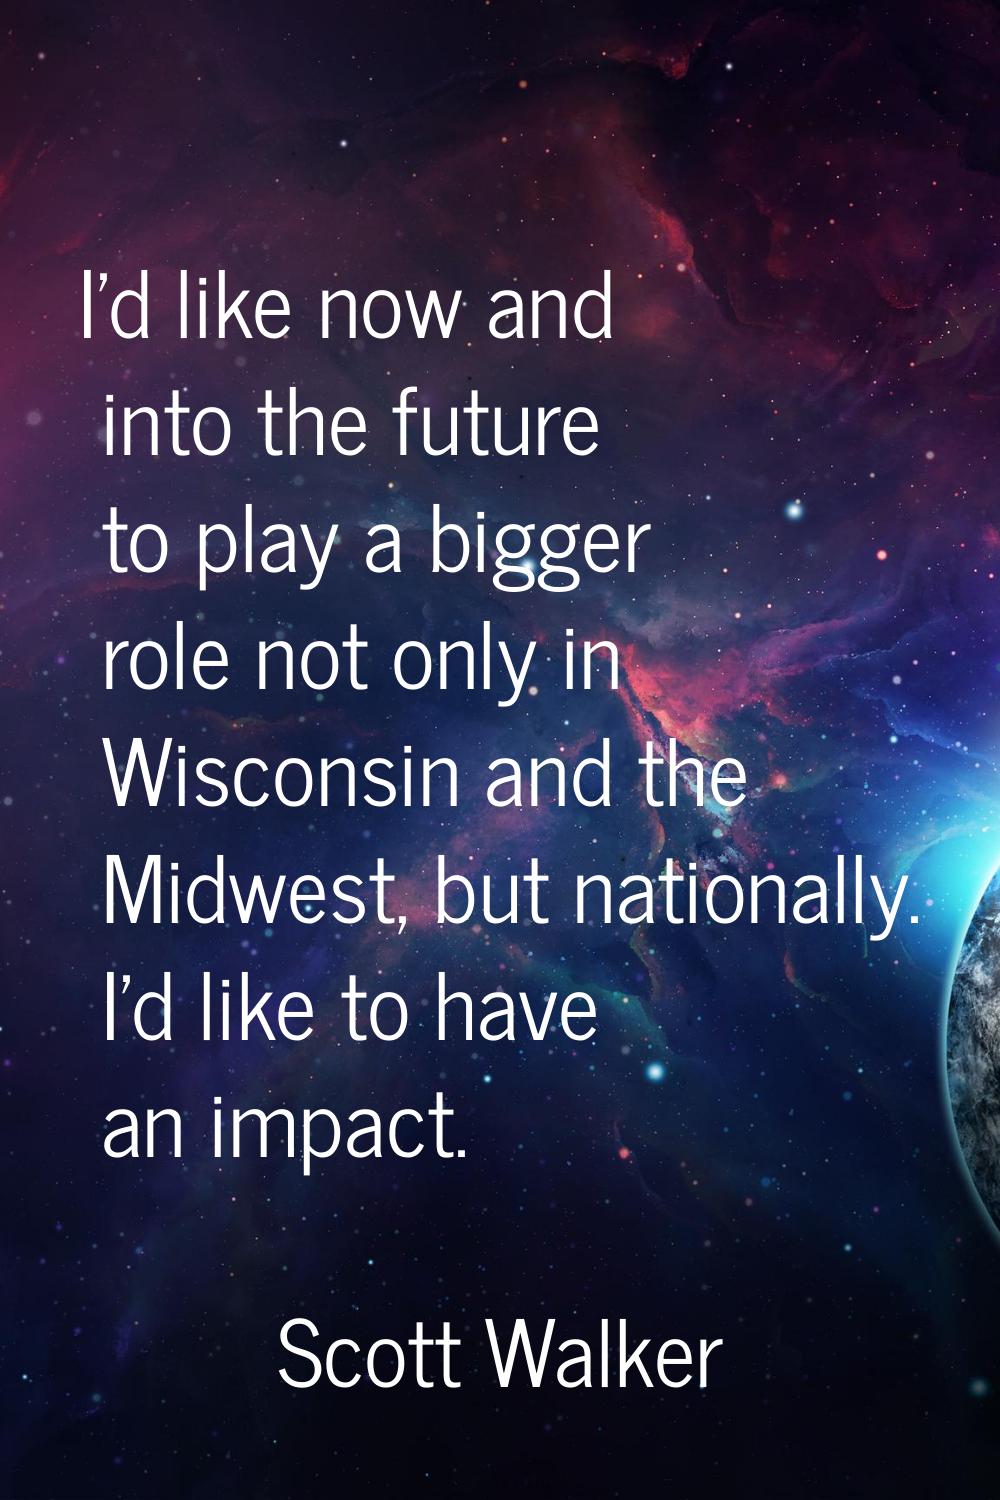 I'd like now and into the future to play a bigger role not only in Wisconsin and the Midwest, but n